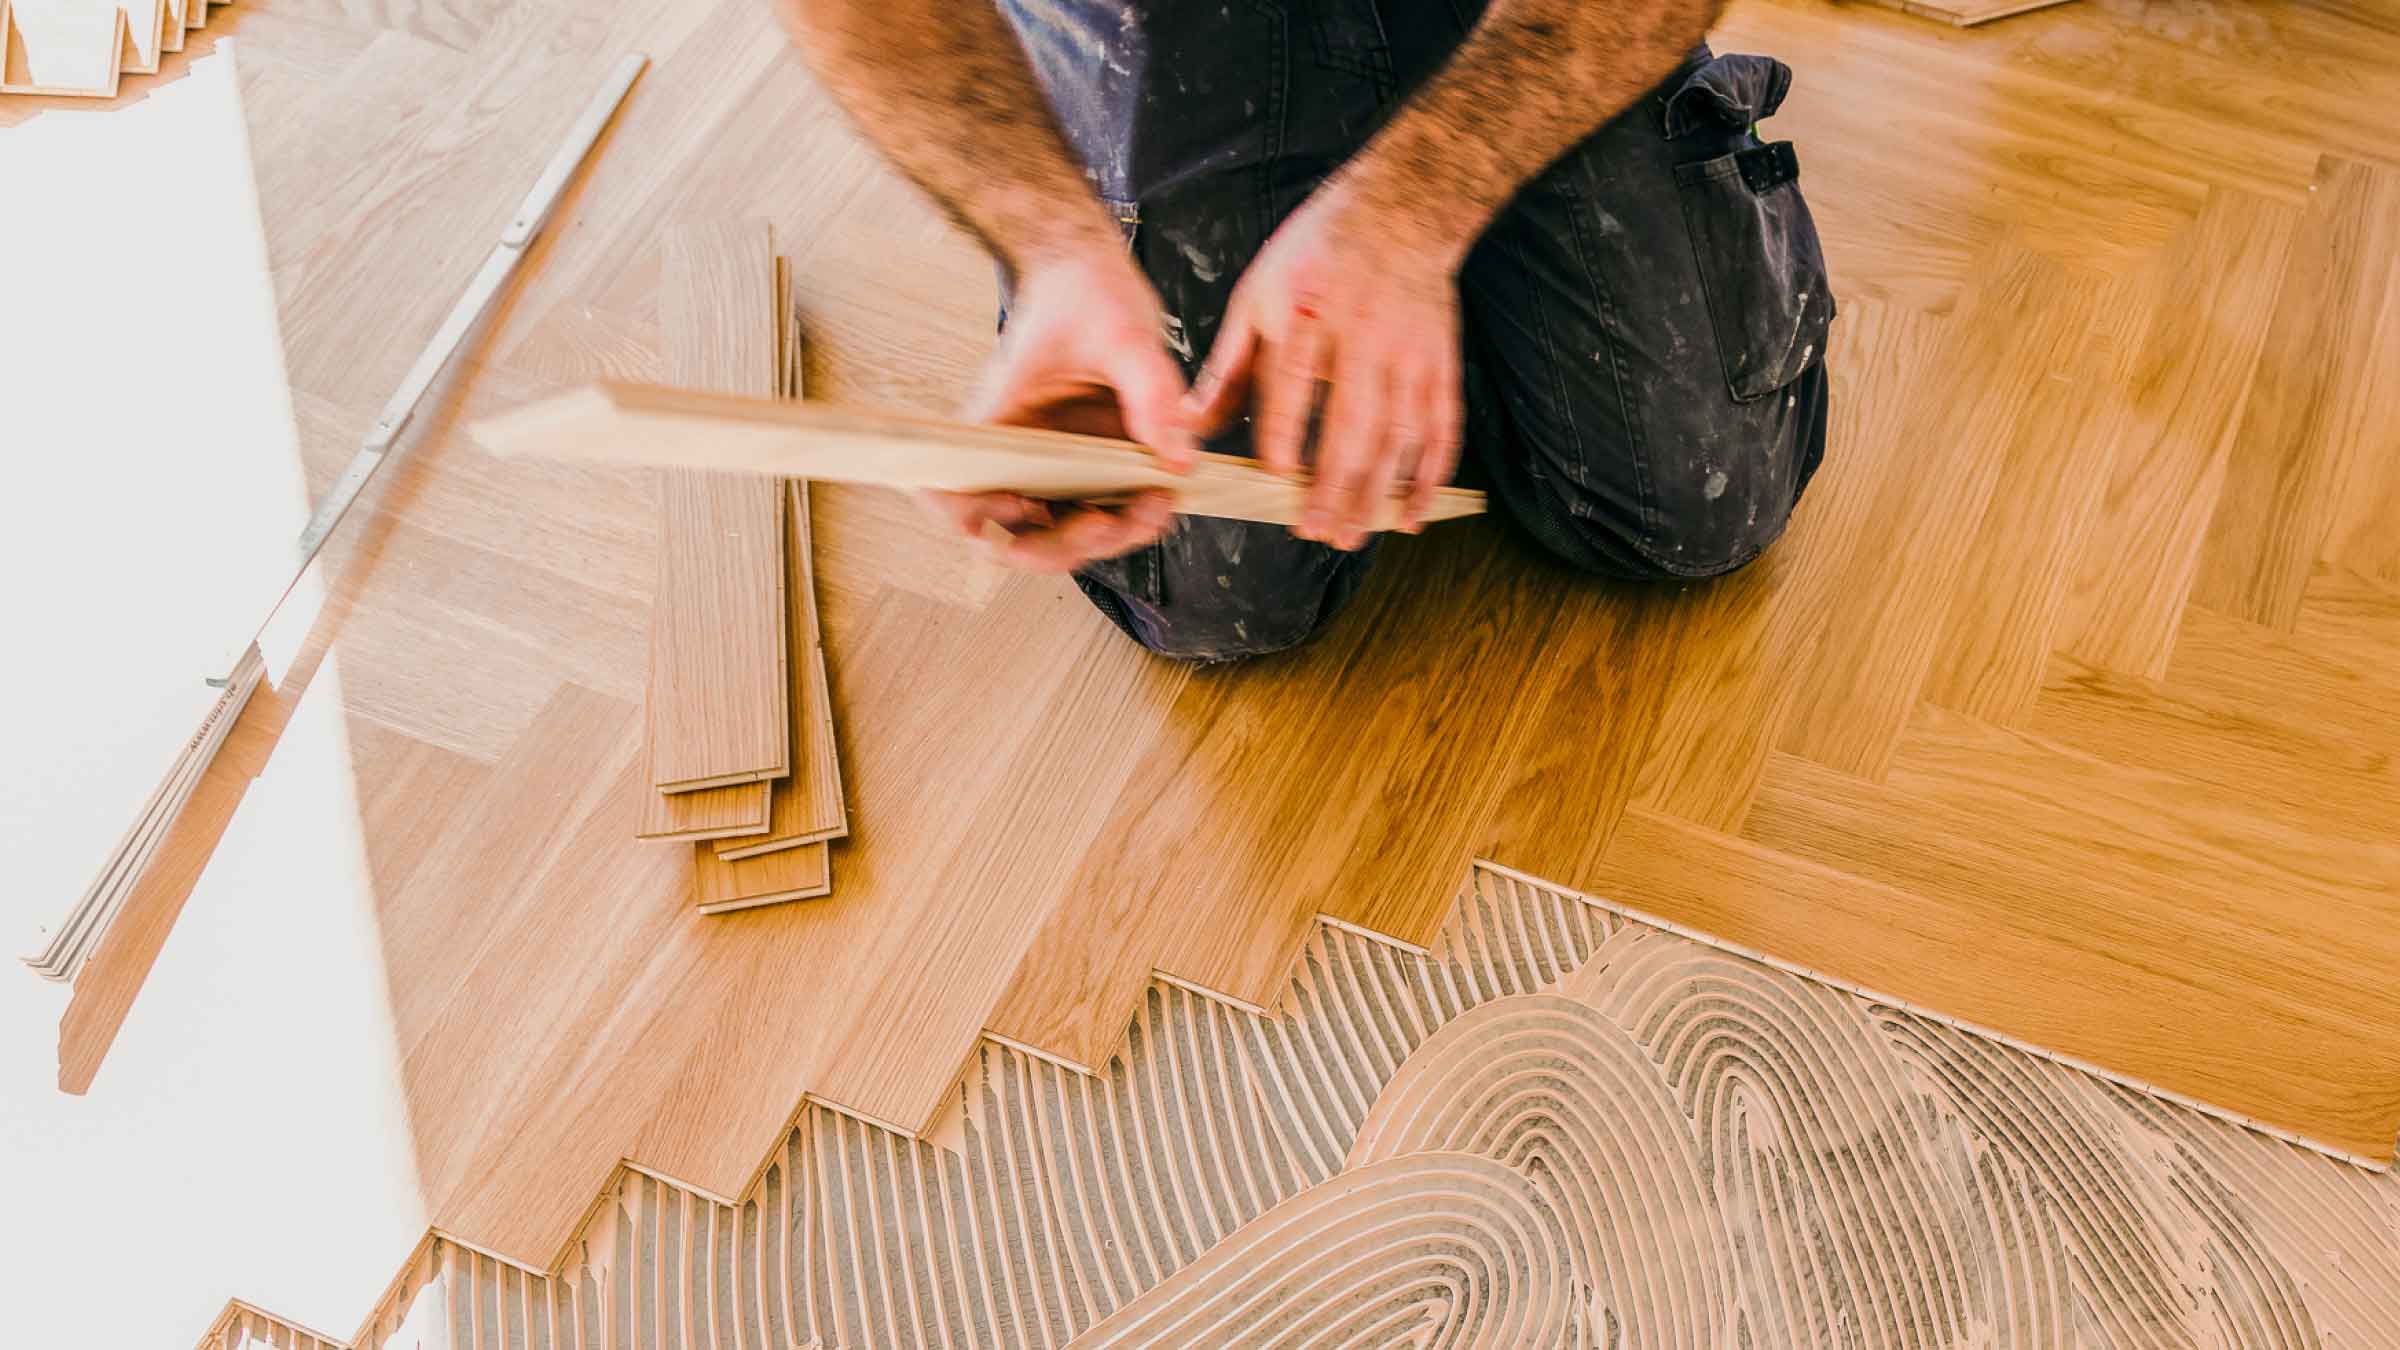 Tradesman in overalls kneels down placing a piece of timber onto a concrete floor where he's almost finished laying a herringbone patterned timber floor.